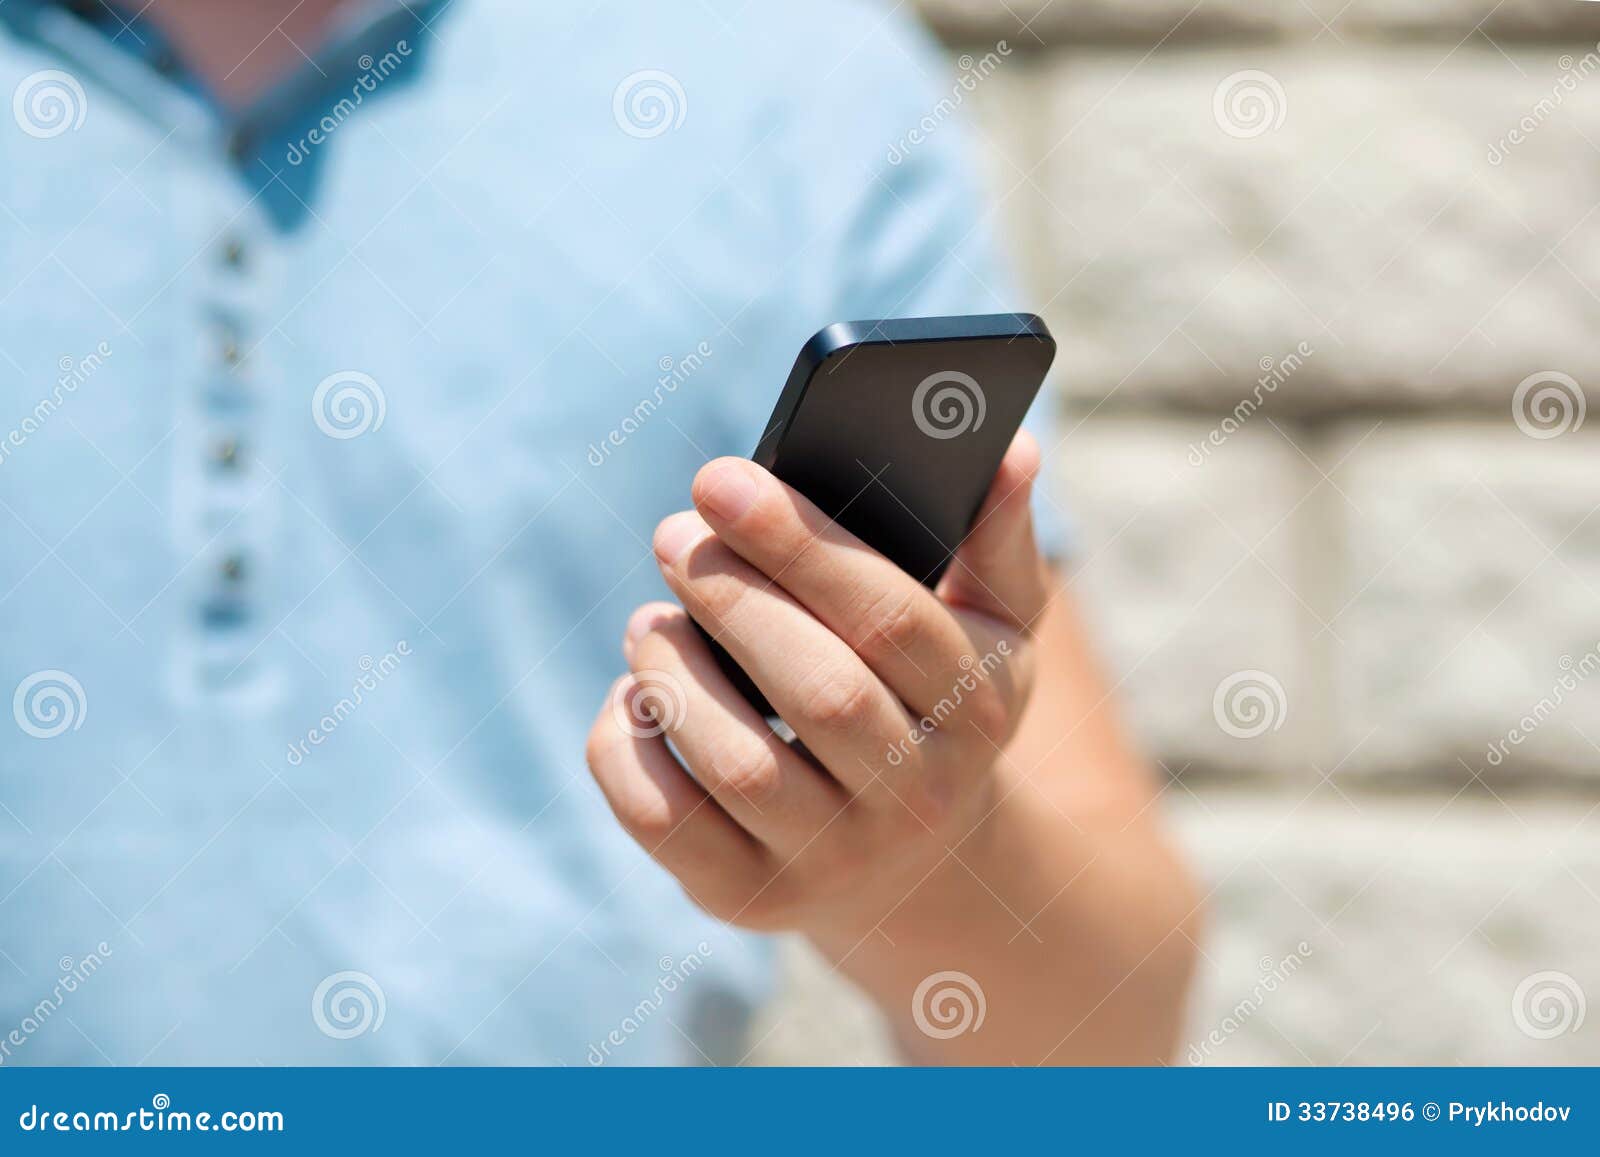 Boy Holding a Phone Against a Green Wall Stock Photo - Image of media ...